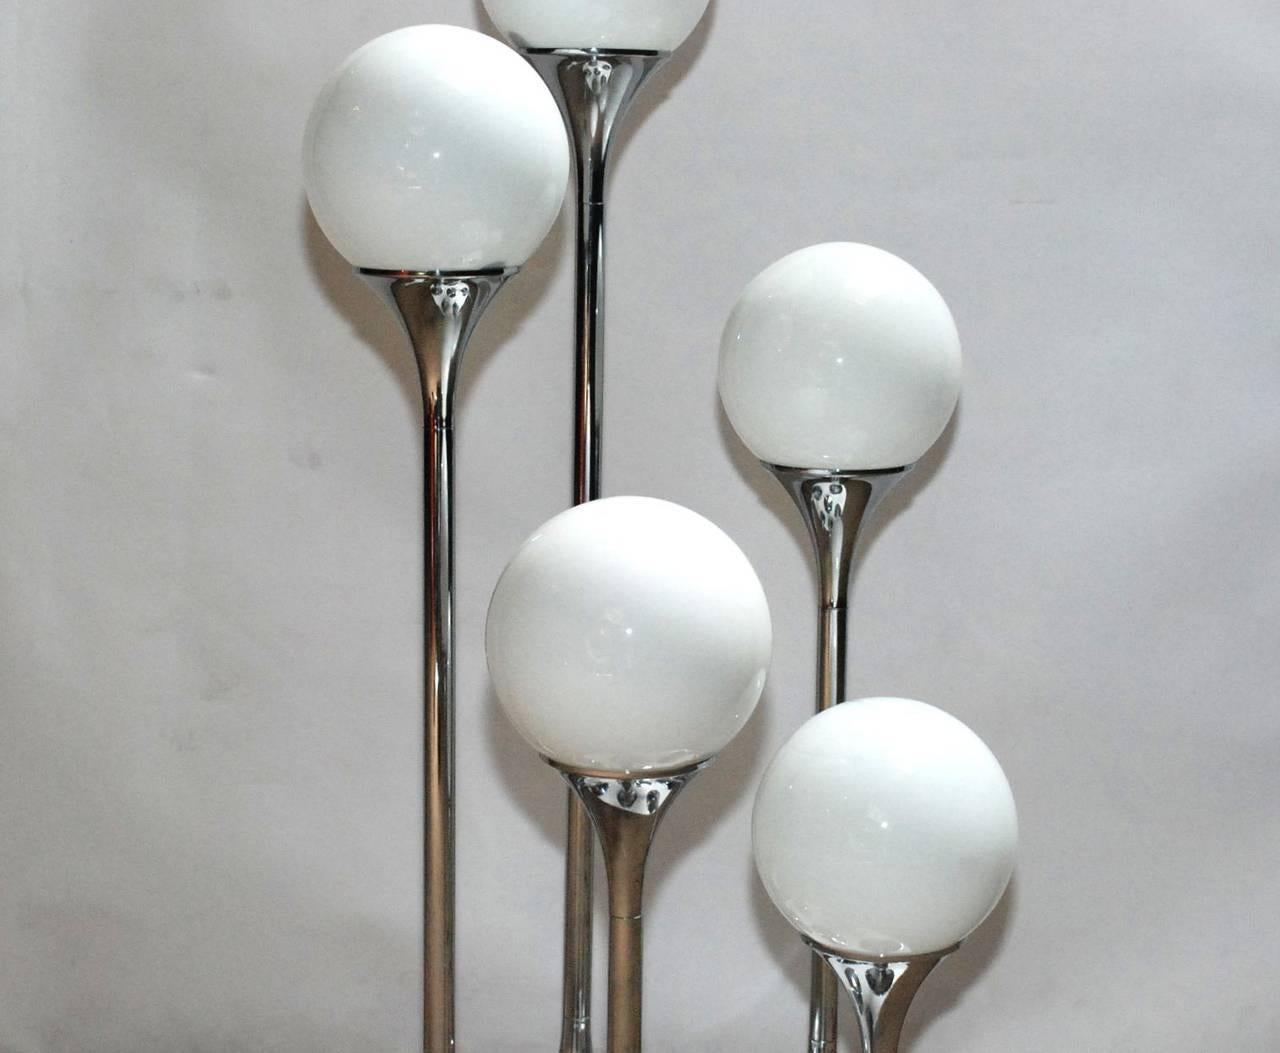 Vintage Italian floor lamp with five white Murano glass globes mounted on chrome hardware / Designed by Sergio Mazza, circa 1960s / Made in Italy
5 lights / E12 or E14 type / max 40W each
Height: 37 inches / Base Diameter: 16 inches
1 in stock in